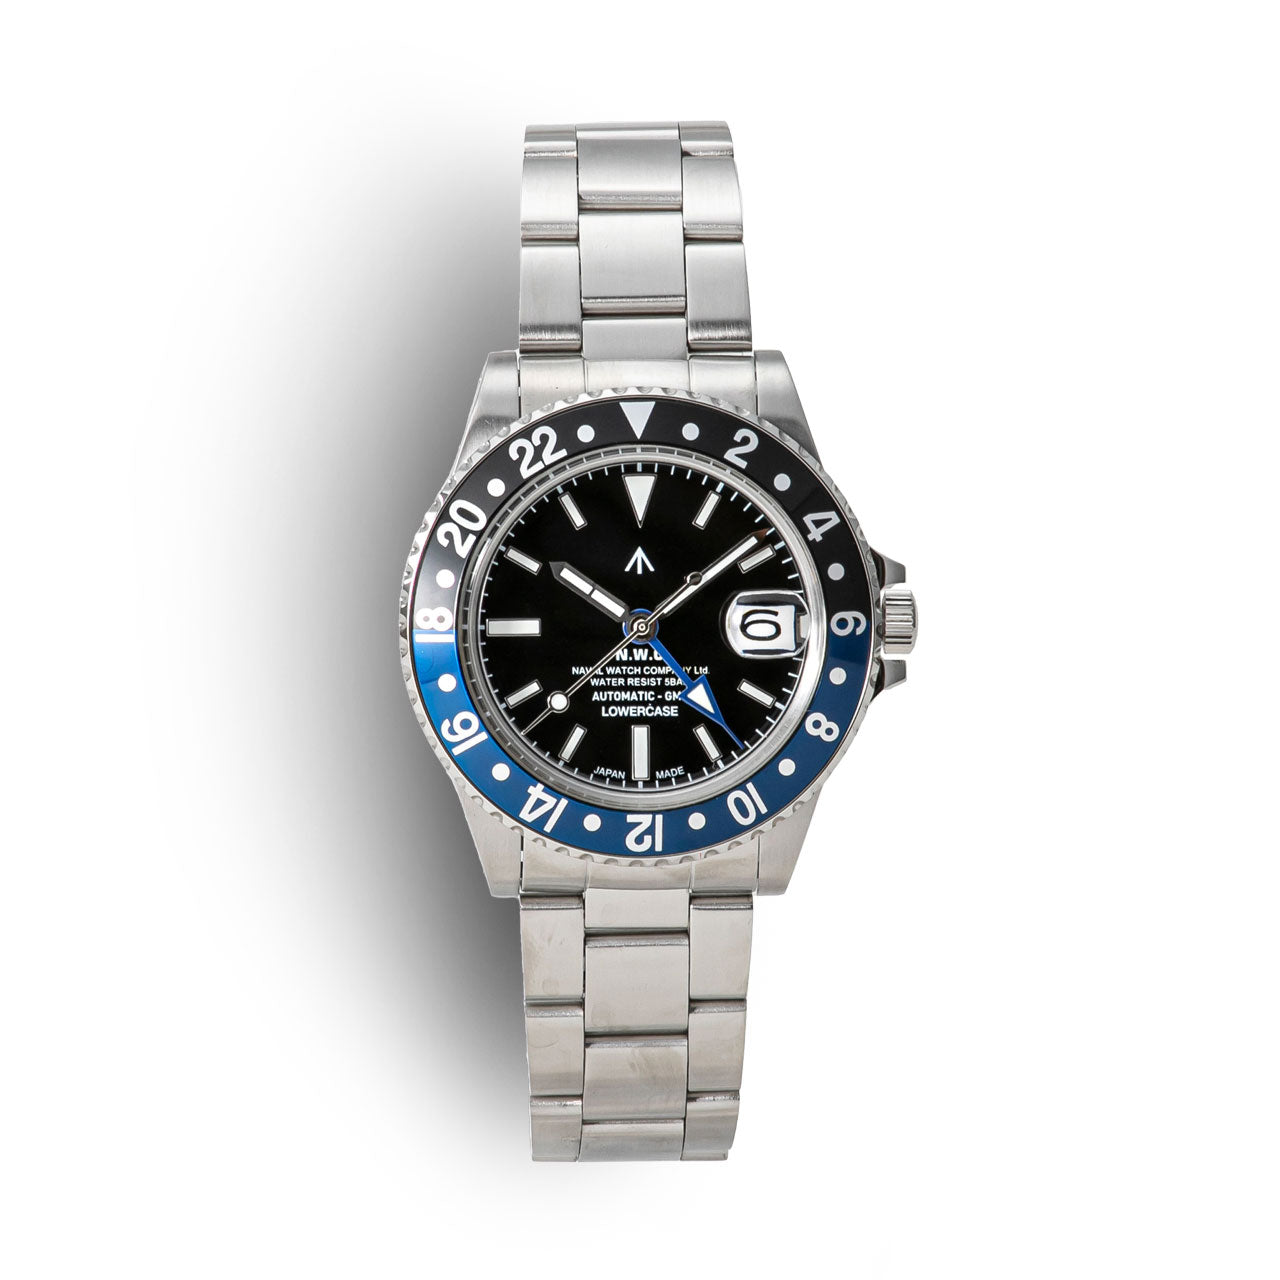 NAVAL WATCH】Naval Watch Produced By LOWERCASE Machanical GMT-